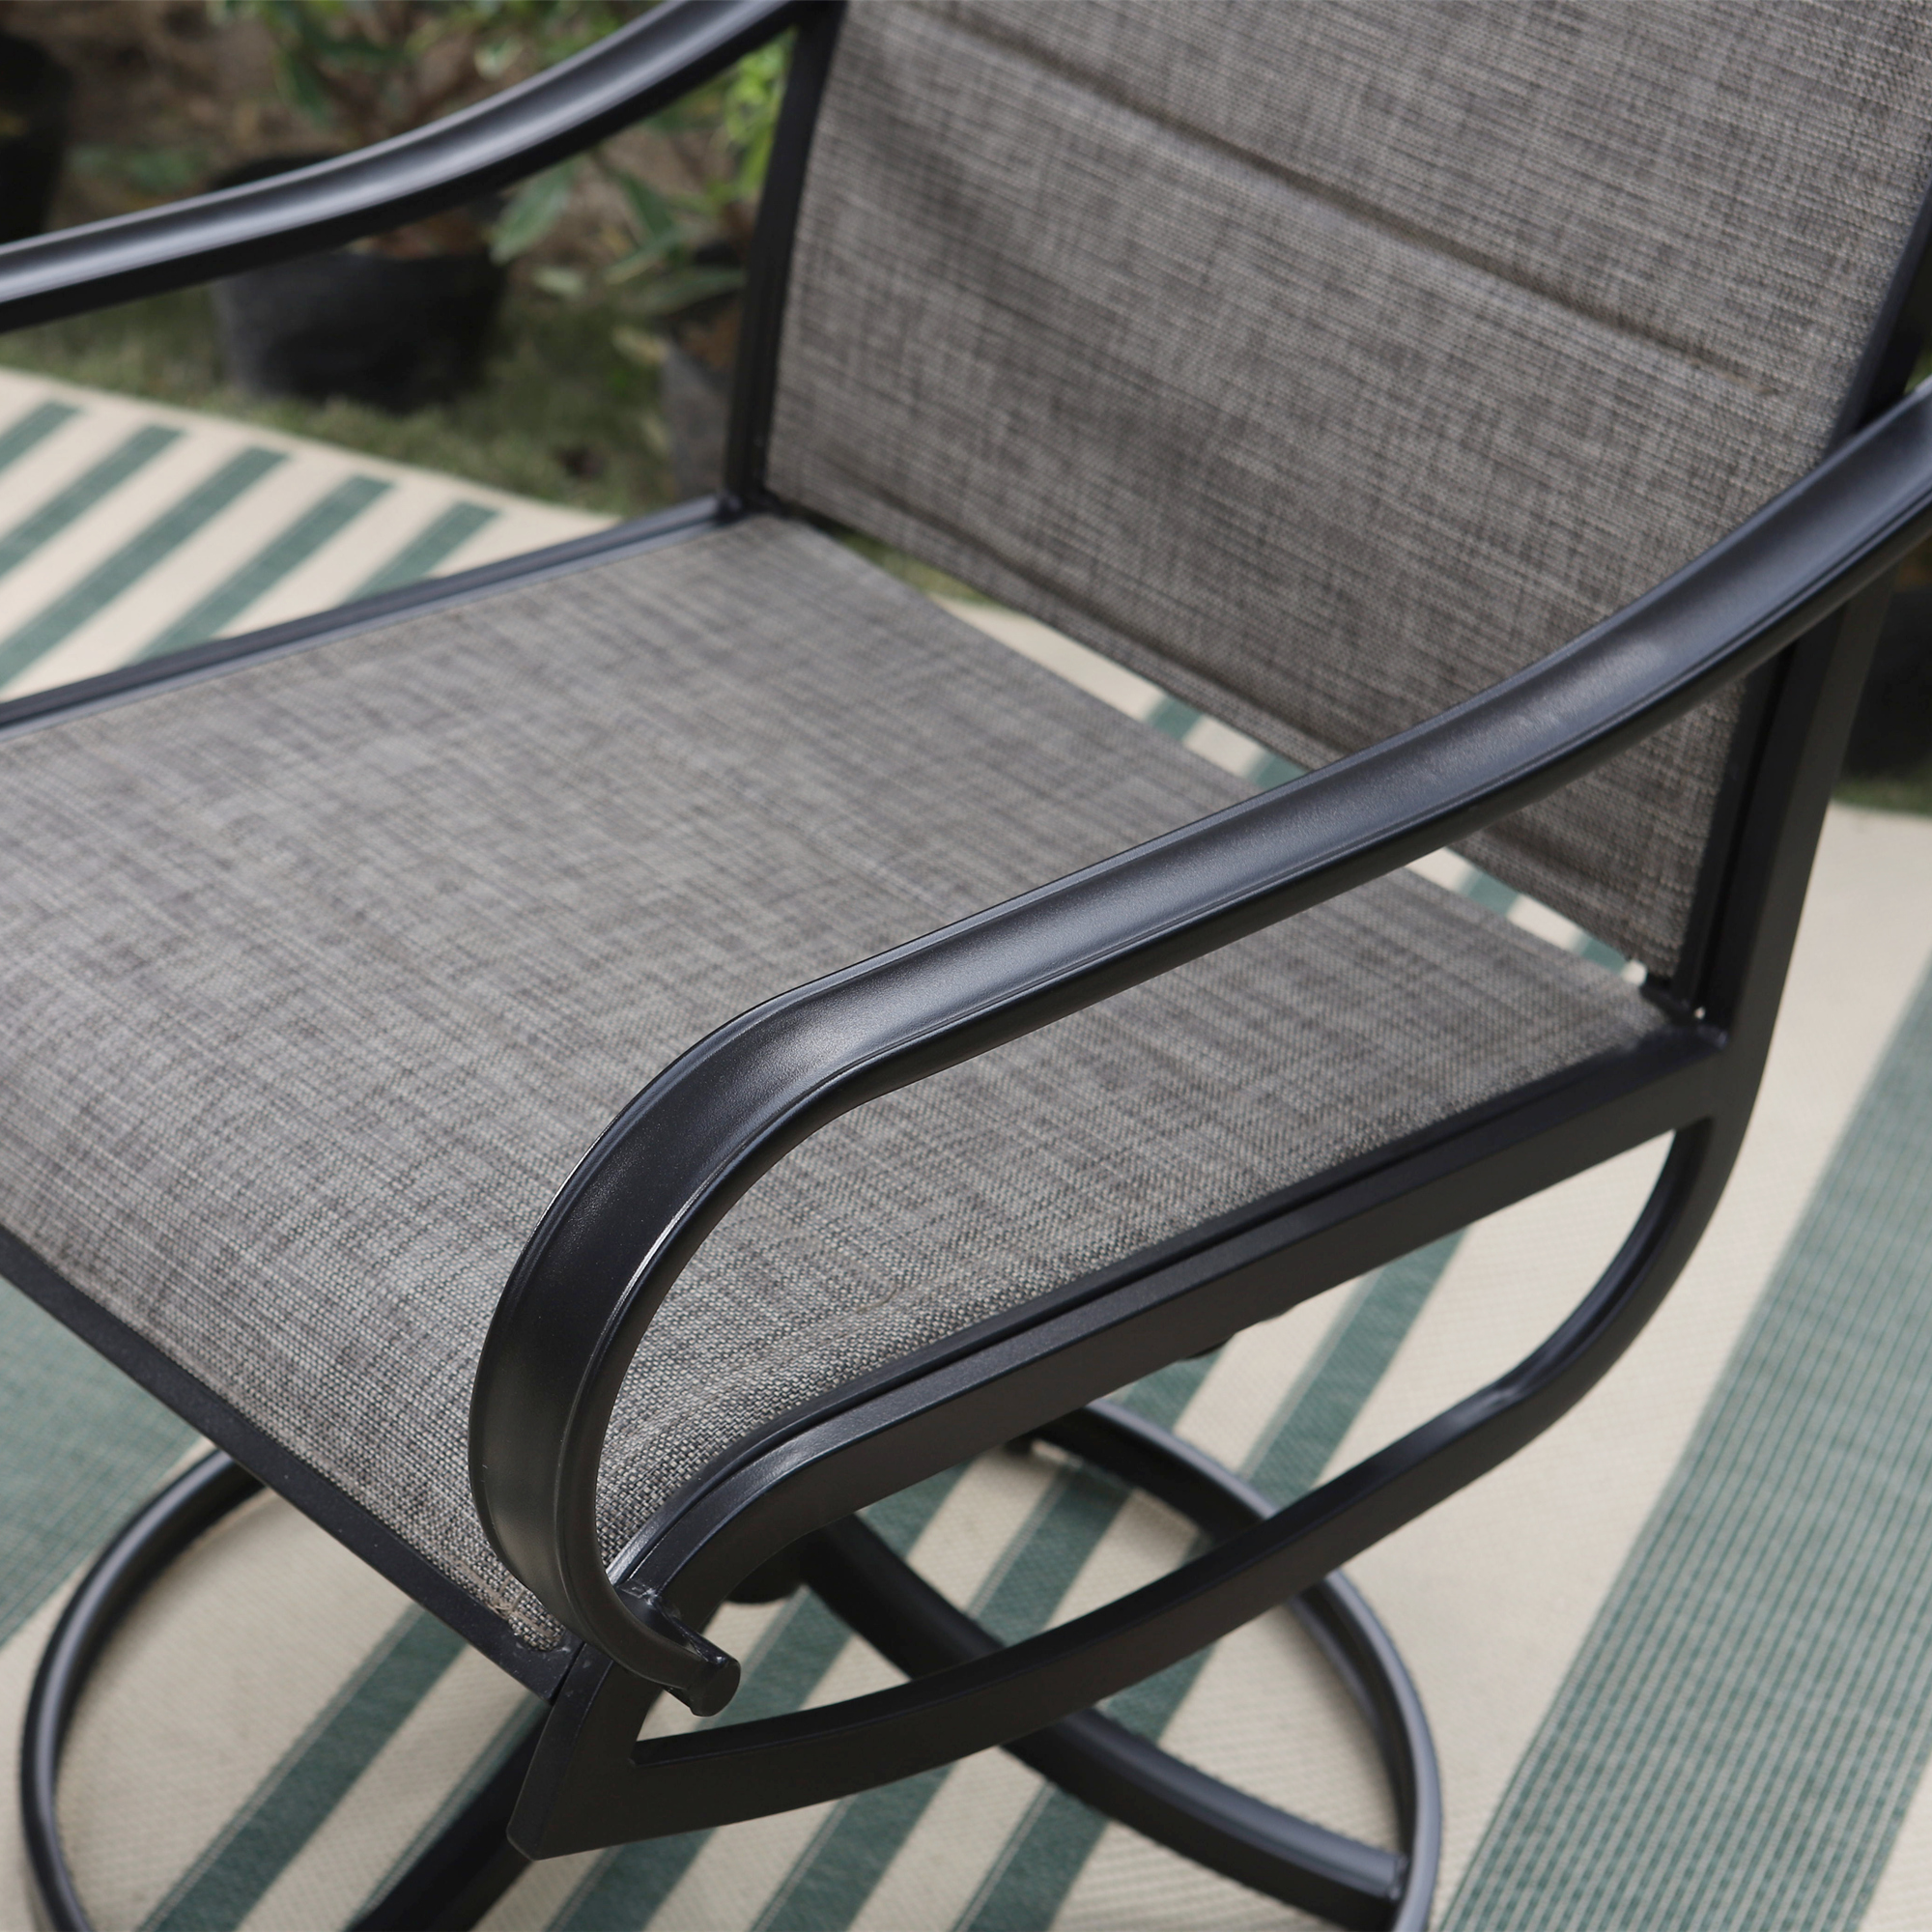 MF Studio Set of 2 High-Back Swivel Outdoor Dining Chairs with Padded Textilene Seat, Black & Dark Brown - image 5 of 11